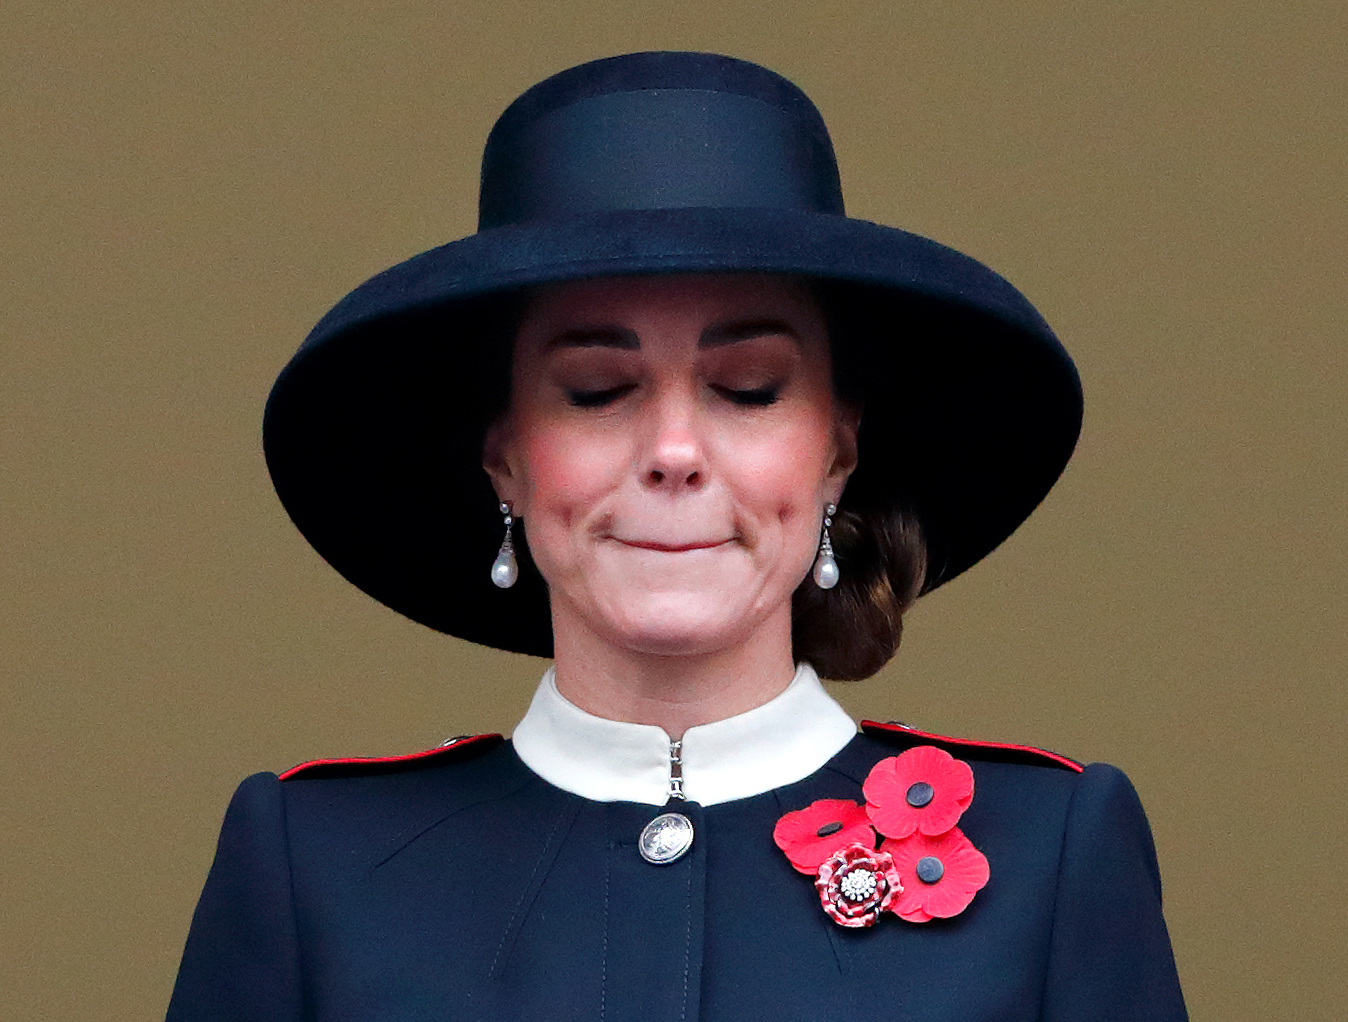 Catherine, Duchess of Cambridge at the annual Remembrance Sunday service at The Cenotaph in London, England on November 14, 2021 | Source: Getty Images